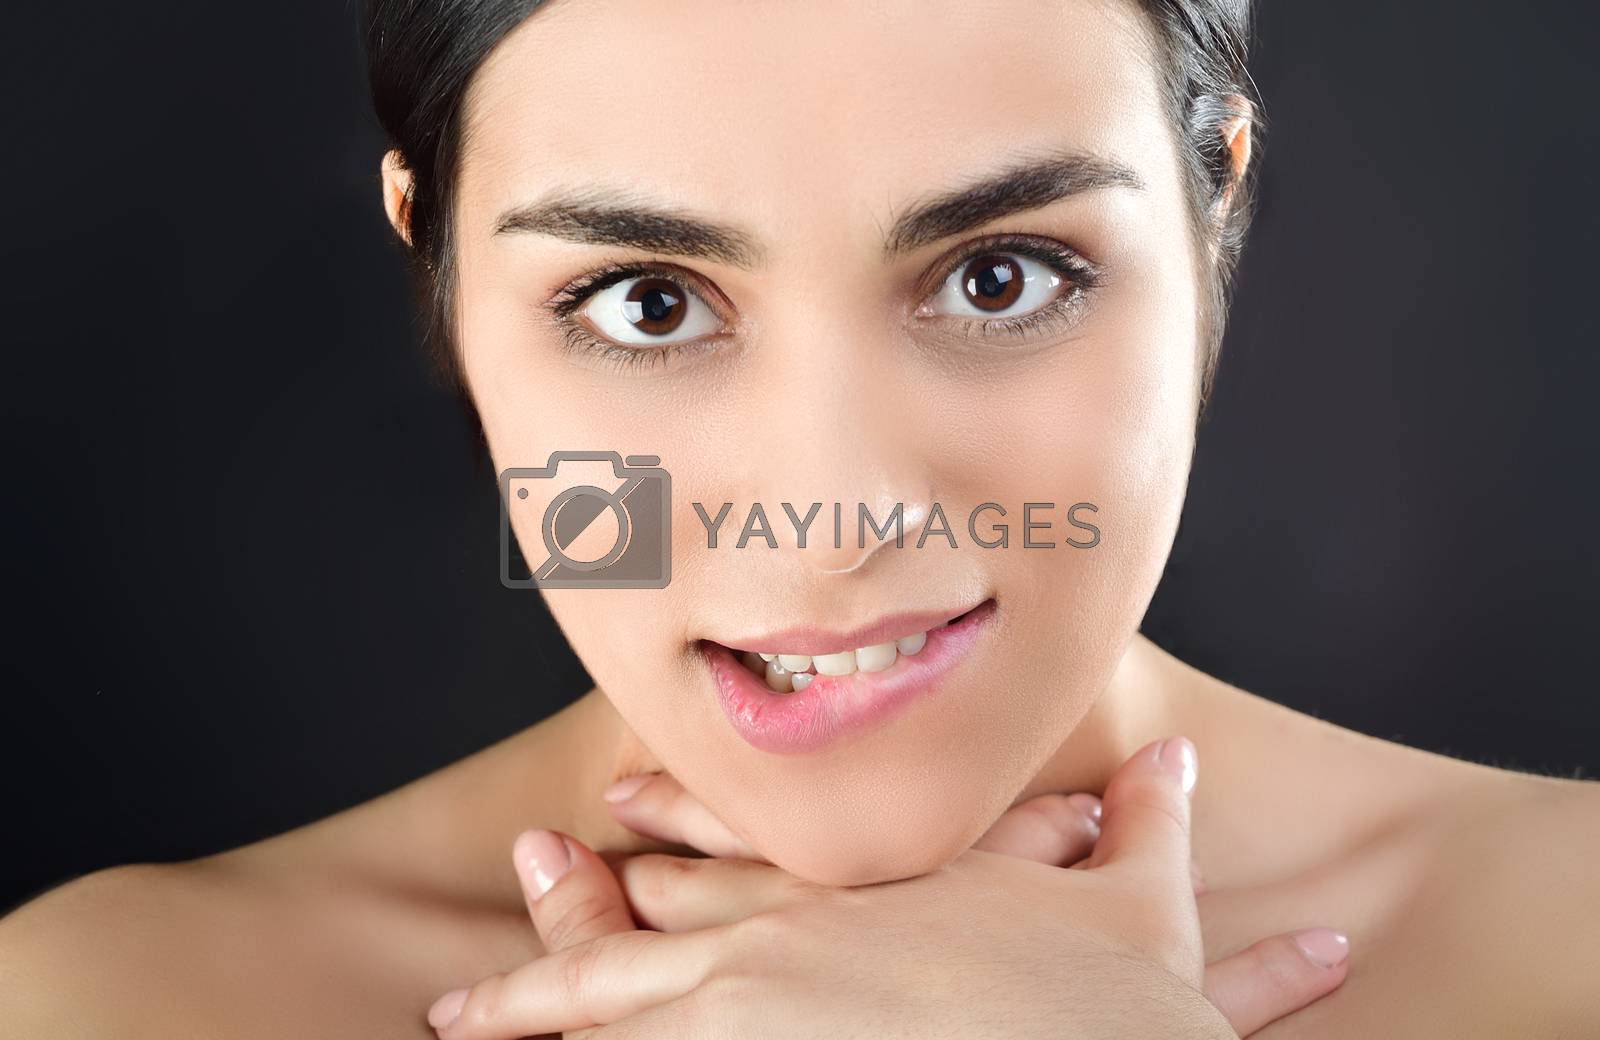 Royalty free image of A young sexy woman passionately looks at the camera, pressing her throat with her hands by xzgorik